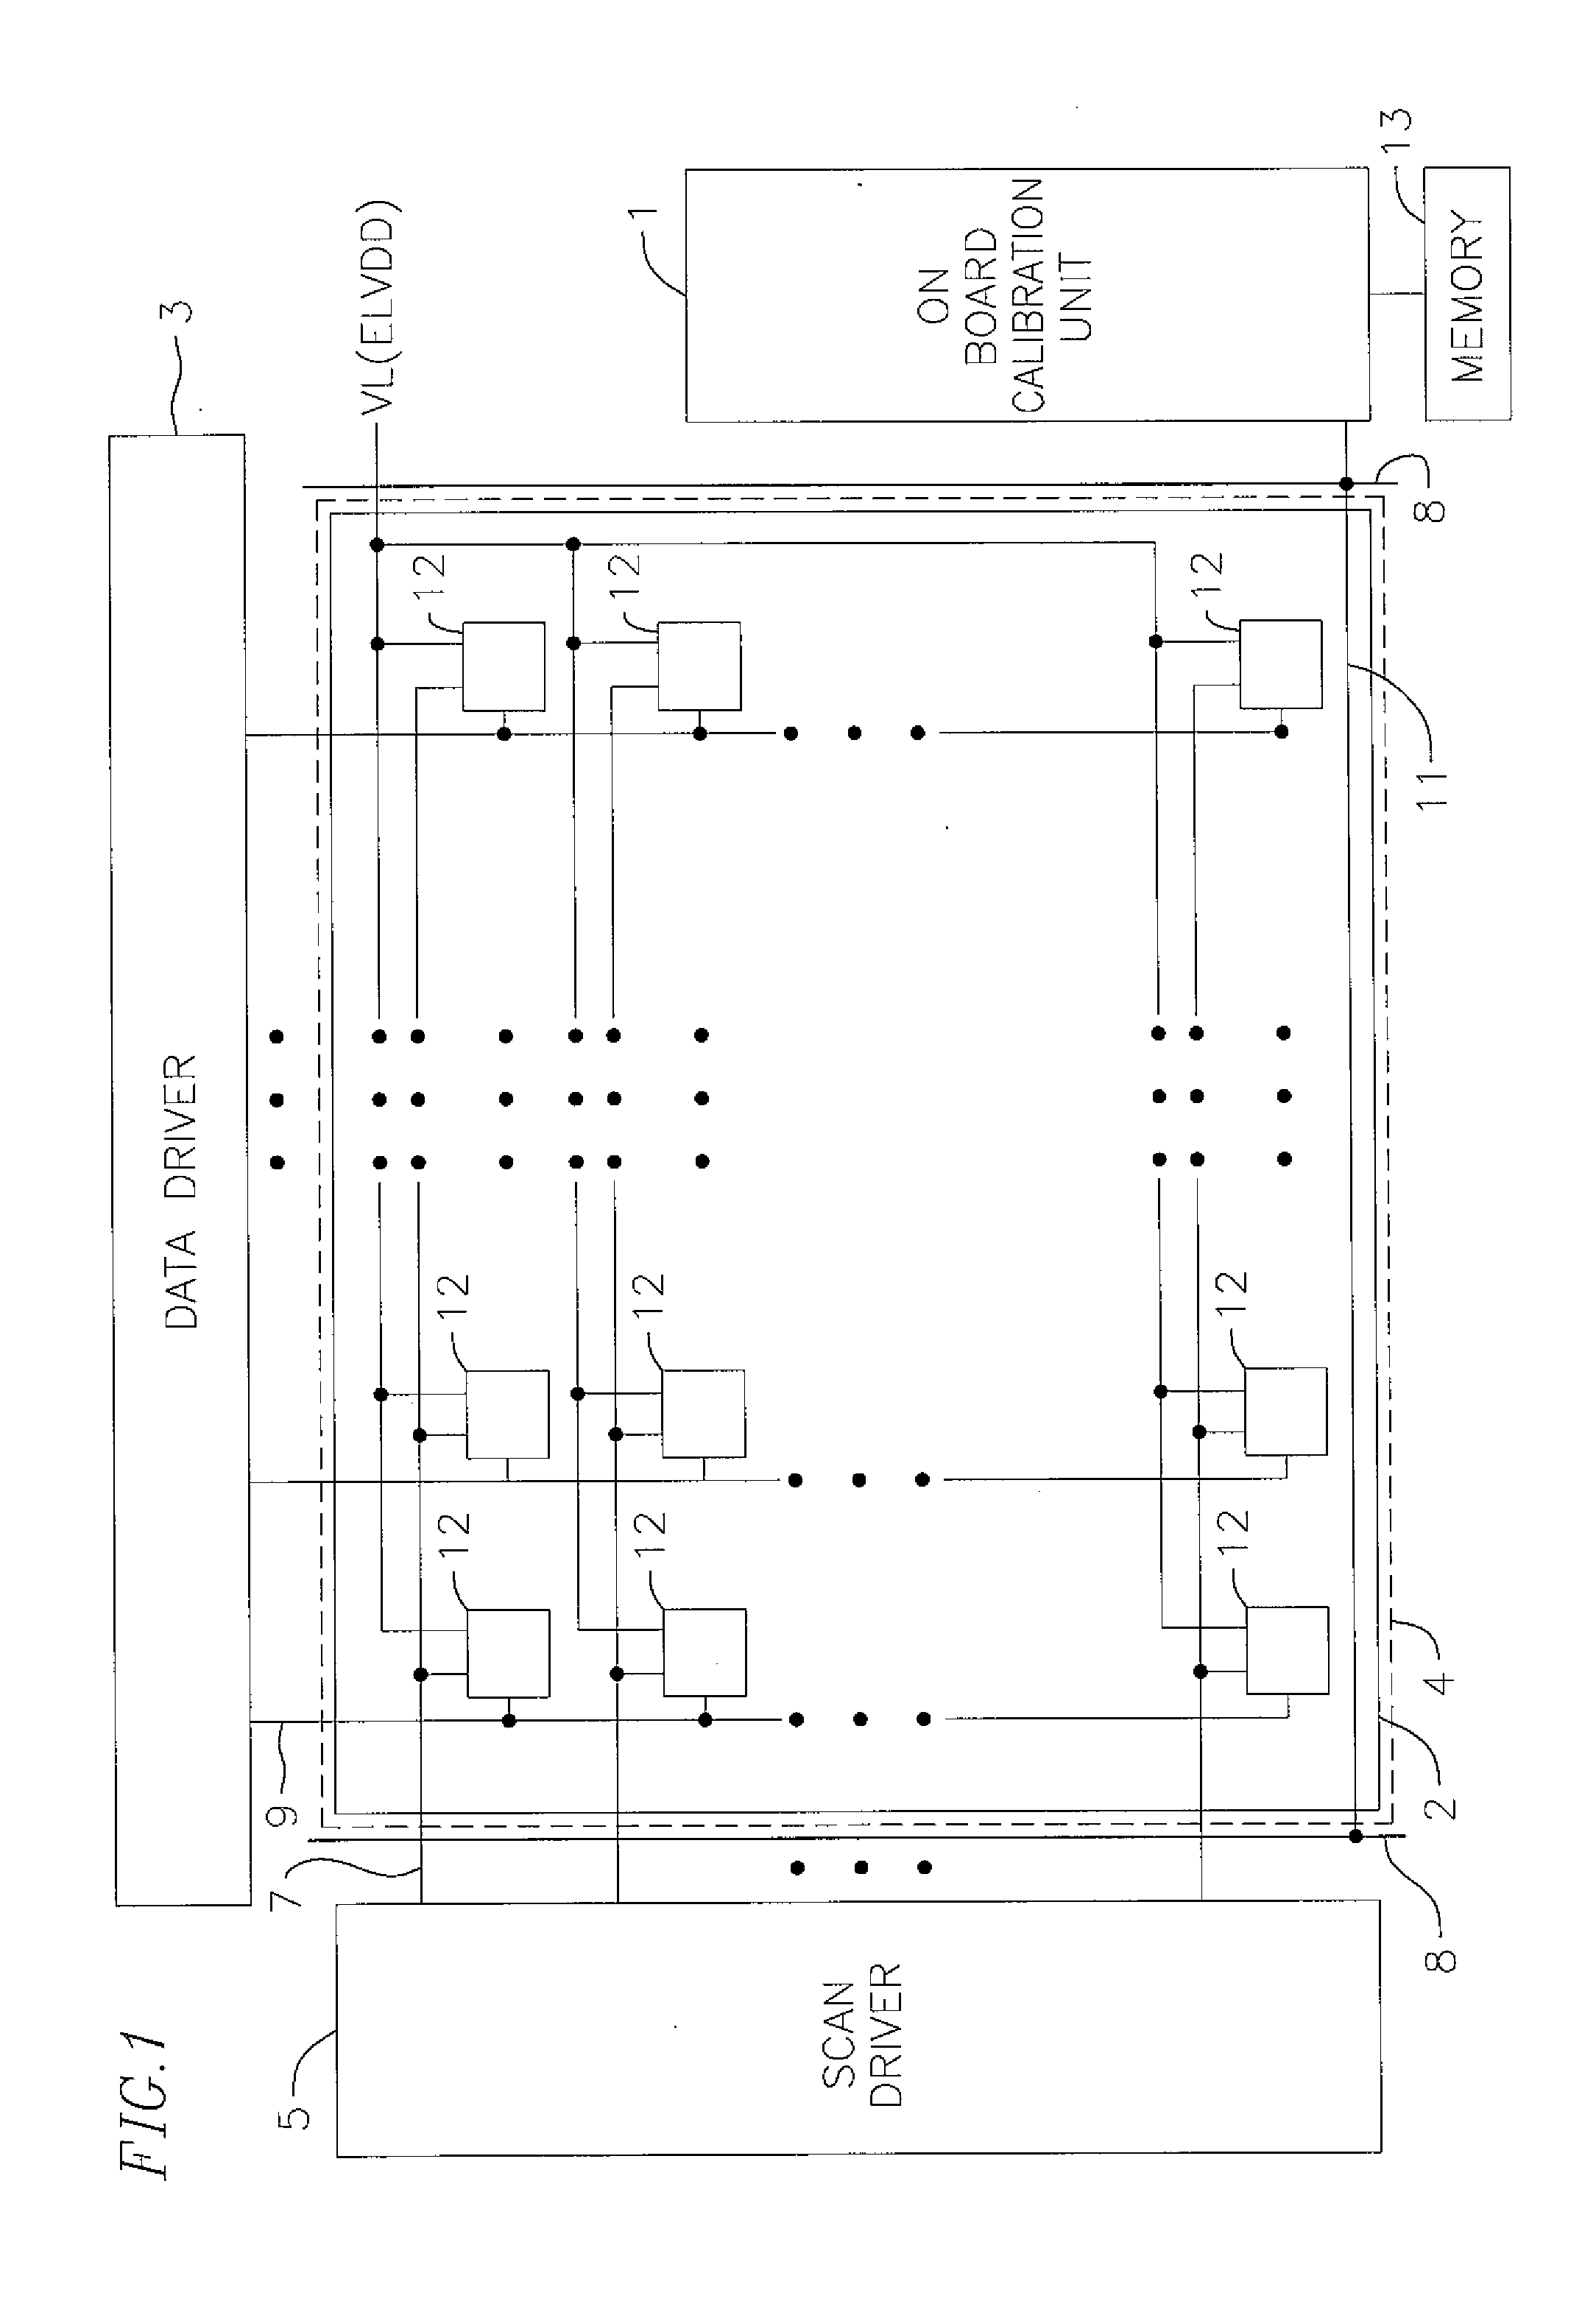 Apparatus and method of direct monitoring the aging of an OLED display and its compensation